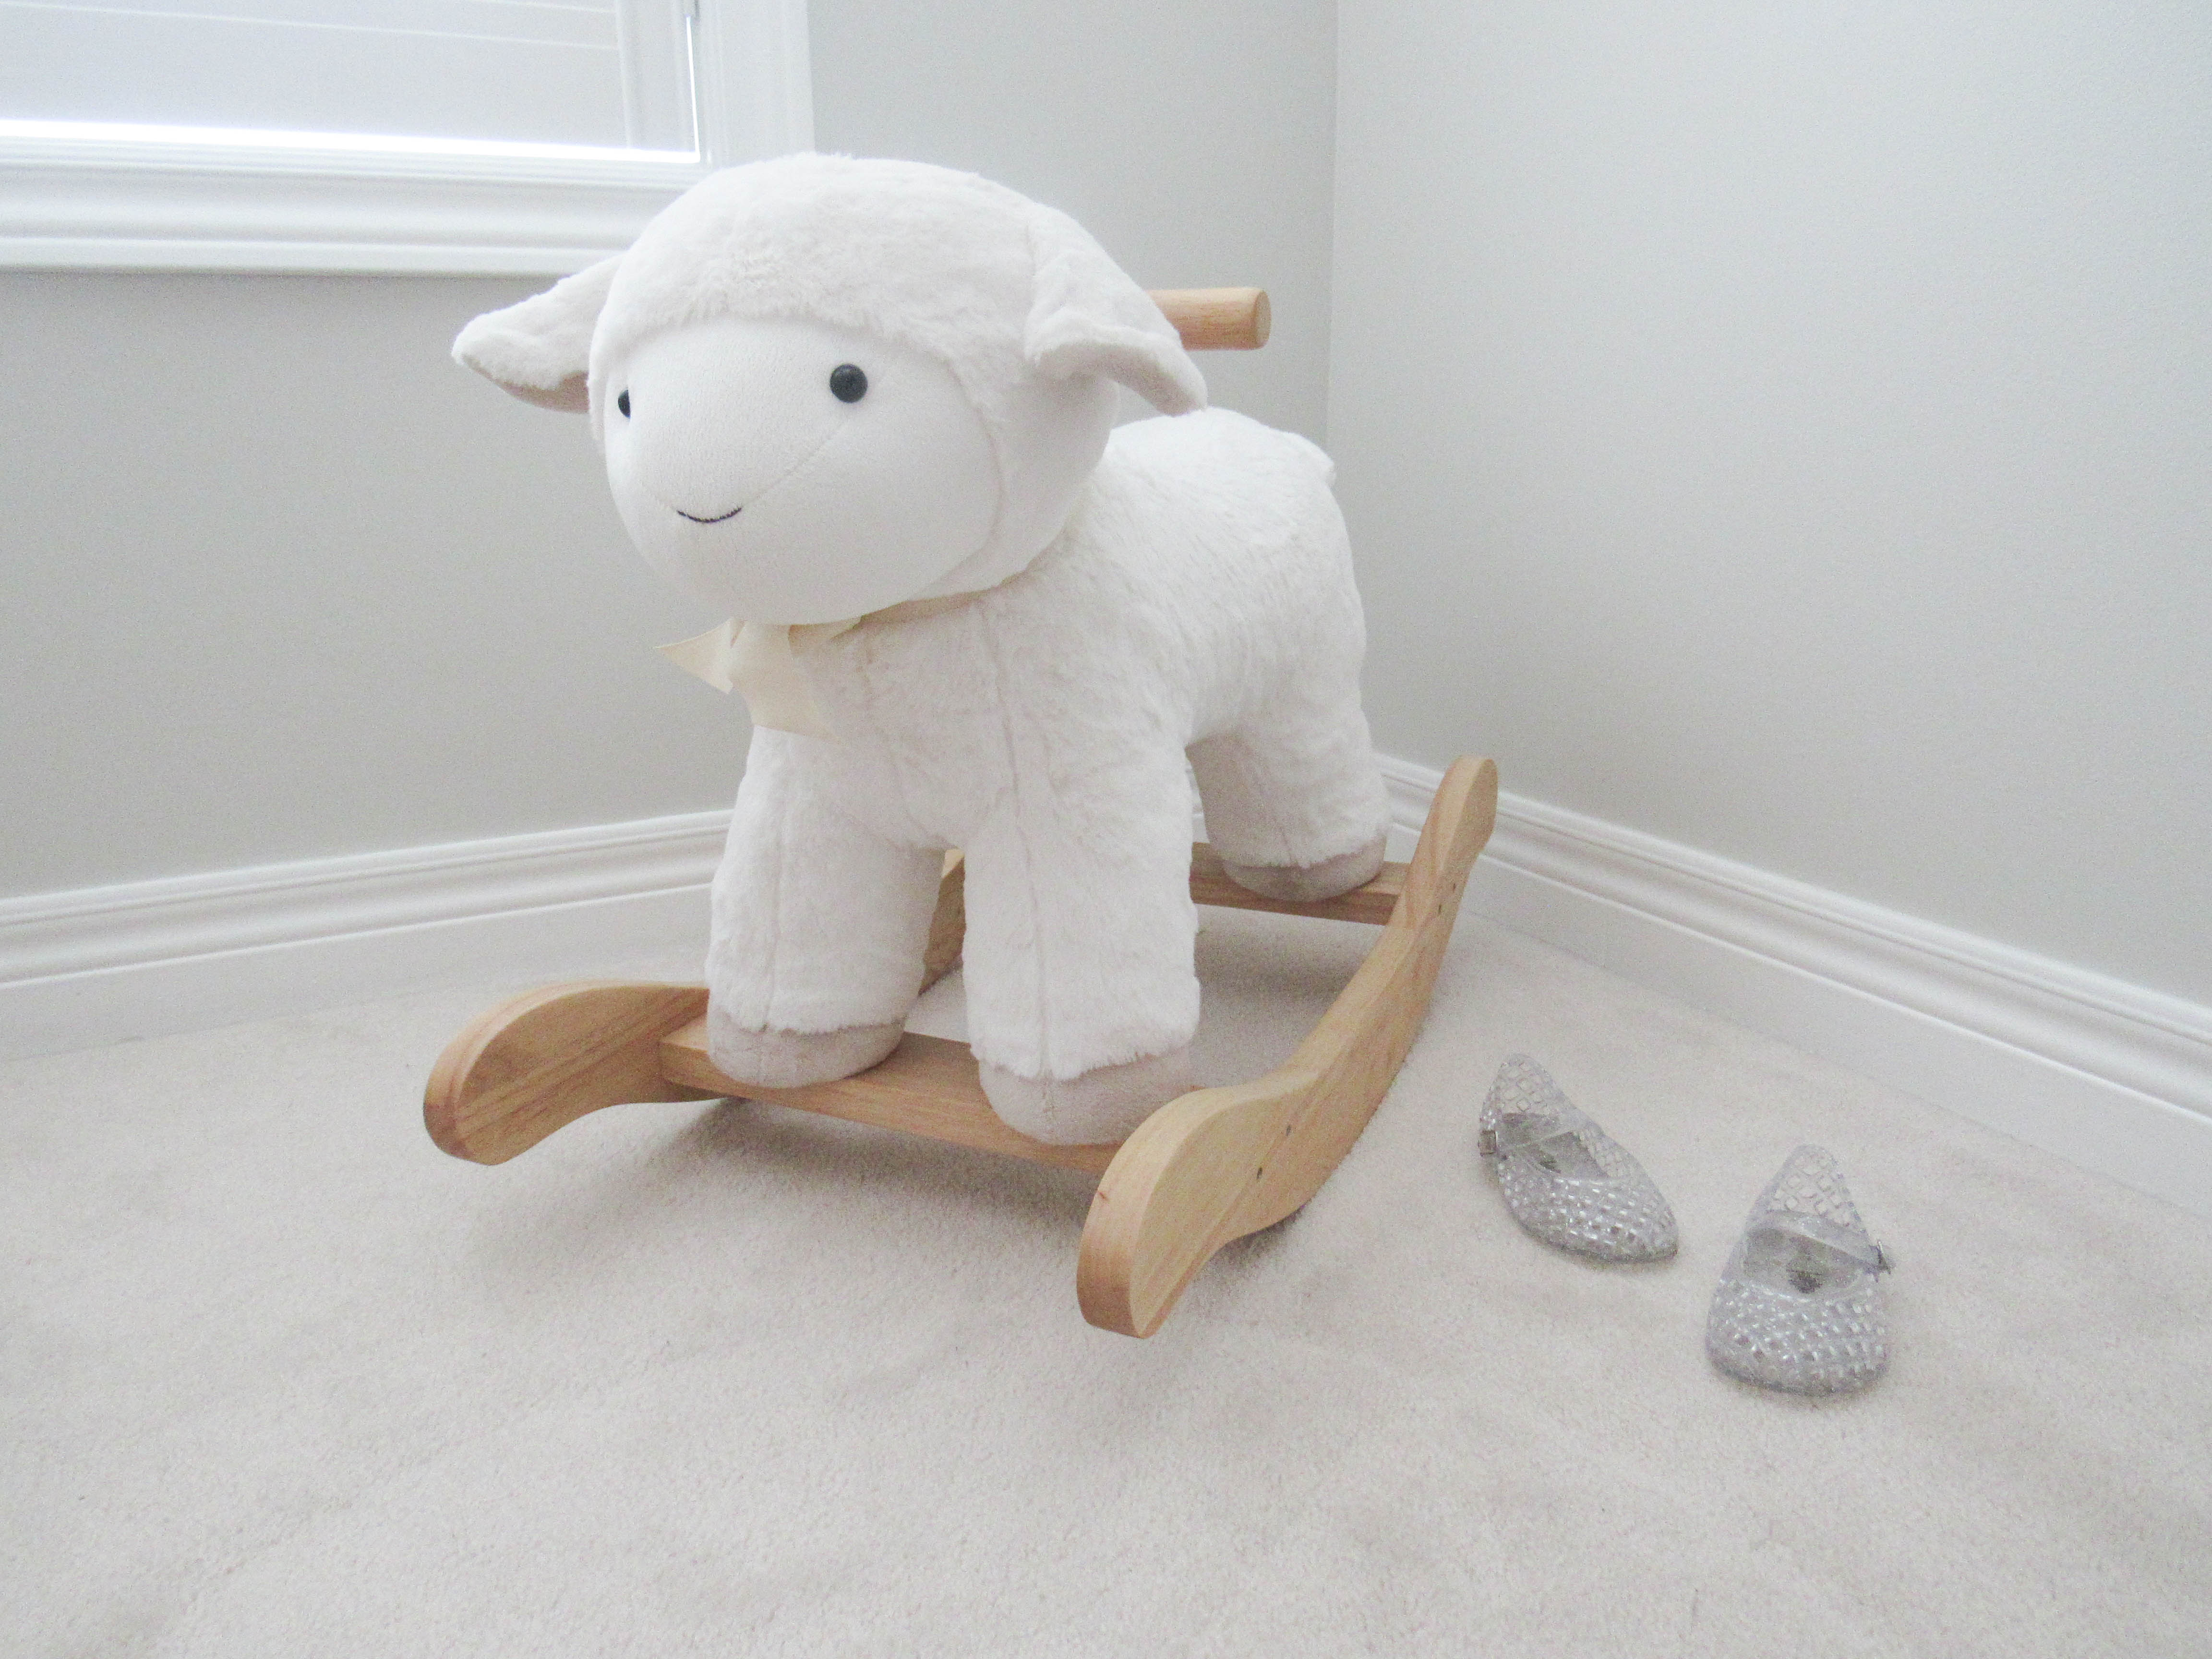 Lamb Rocker from Pottery Barn Kids on Livin' Life with Style 